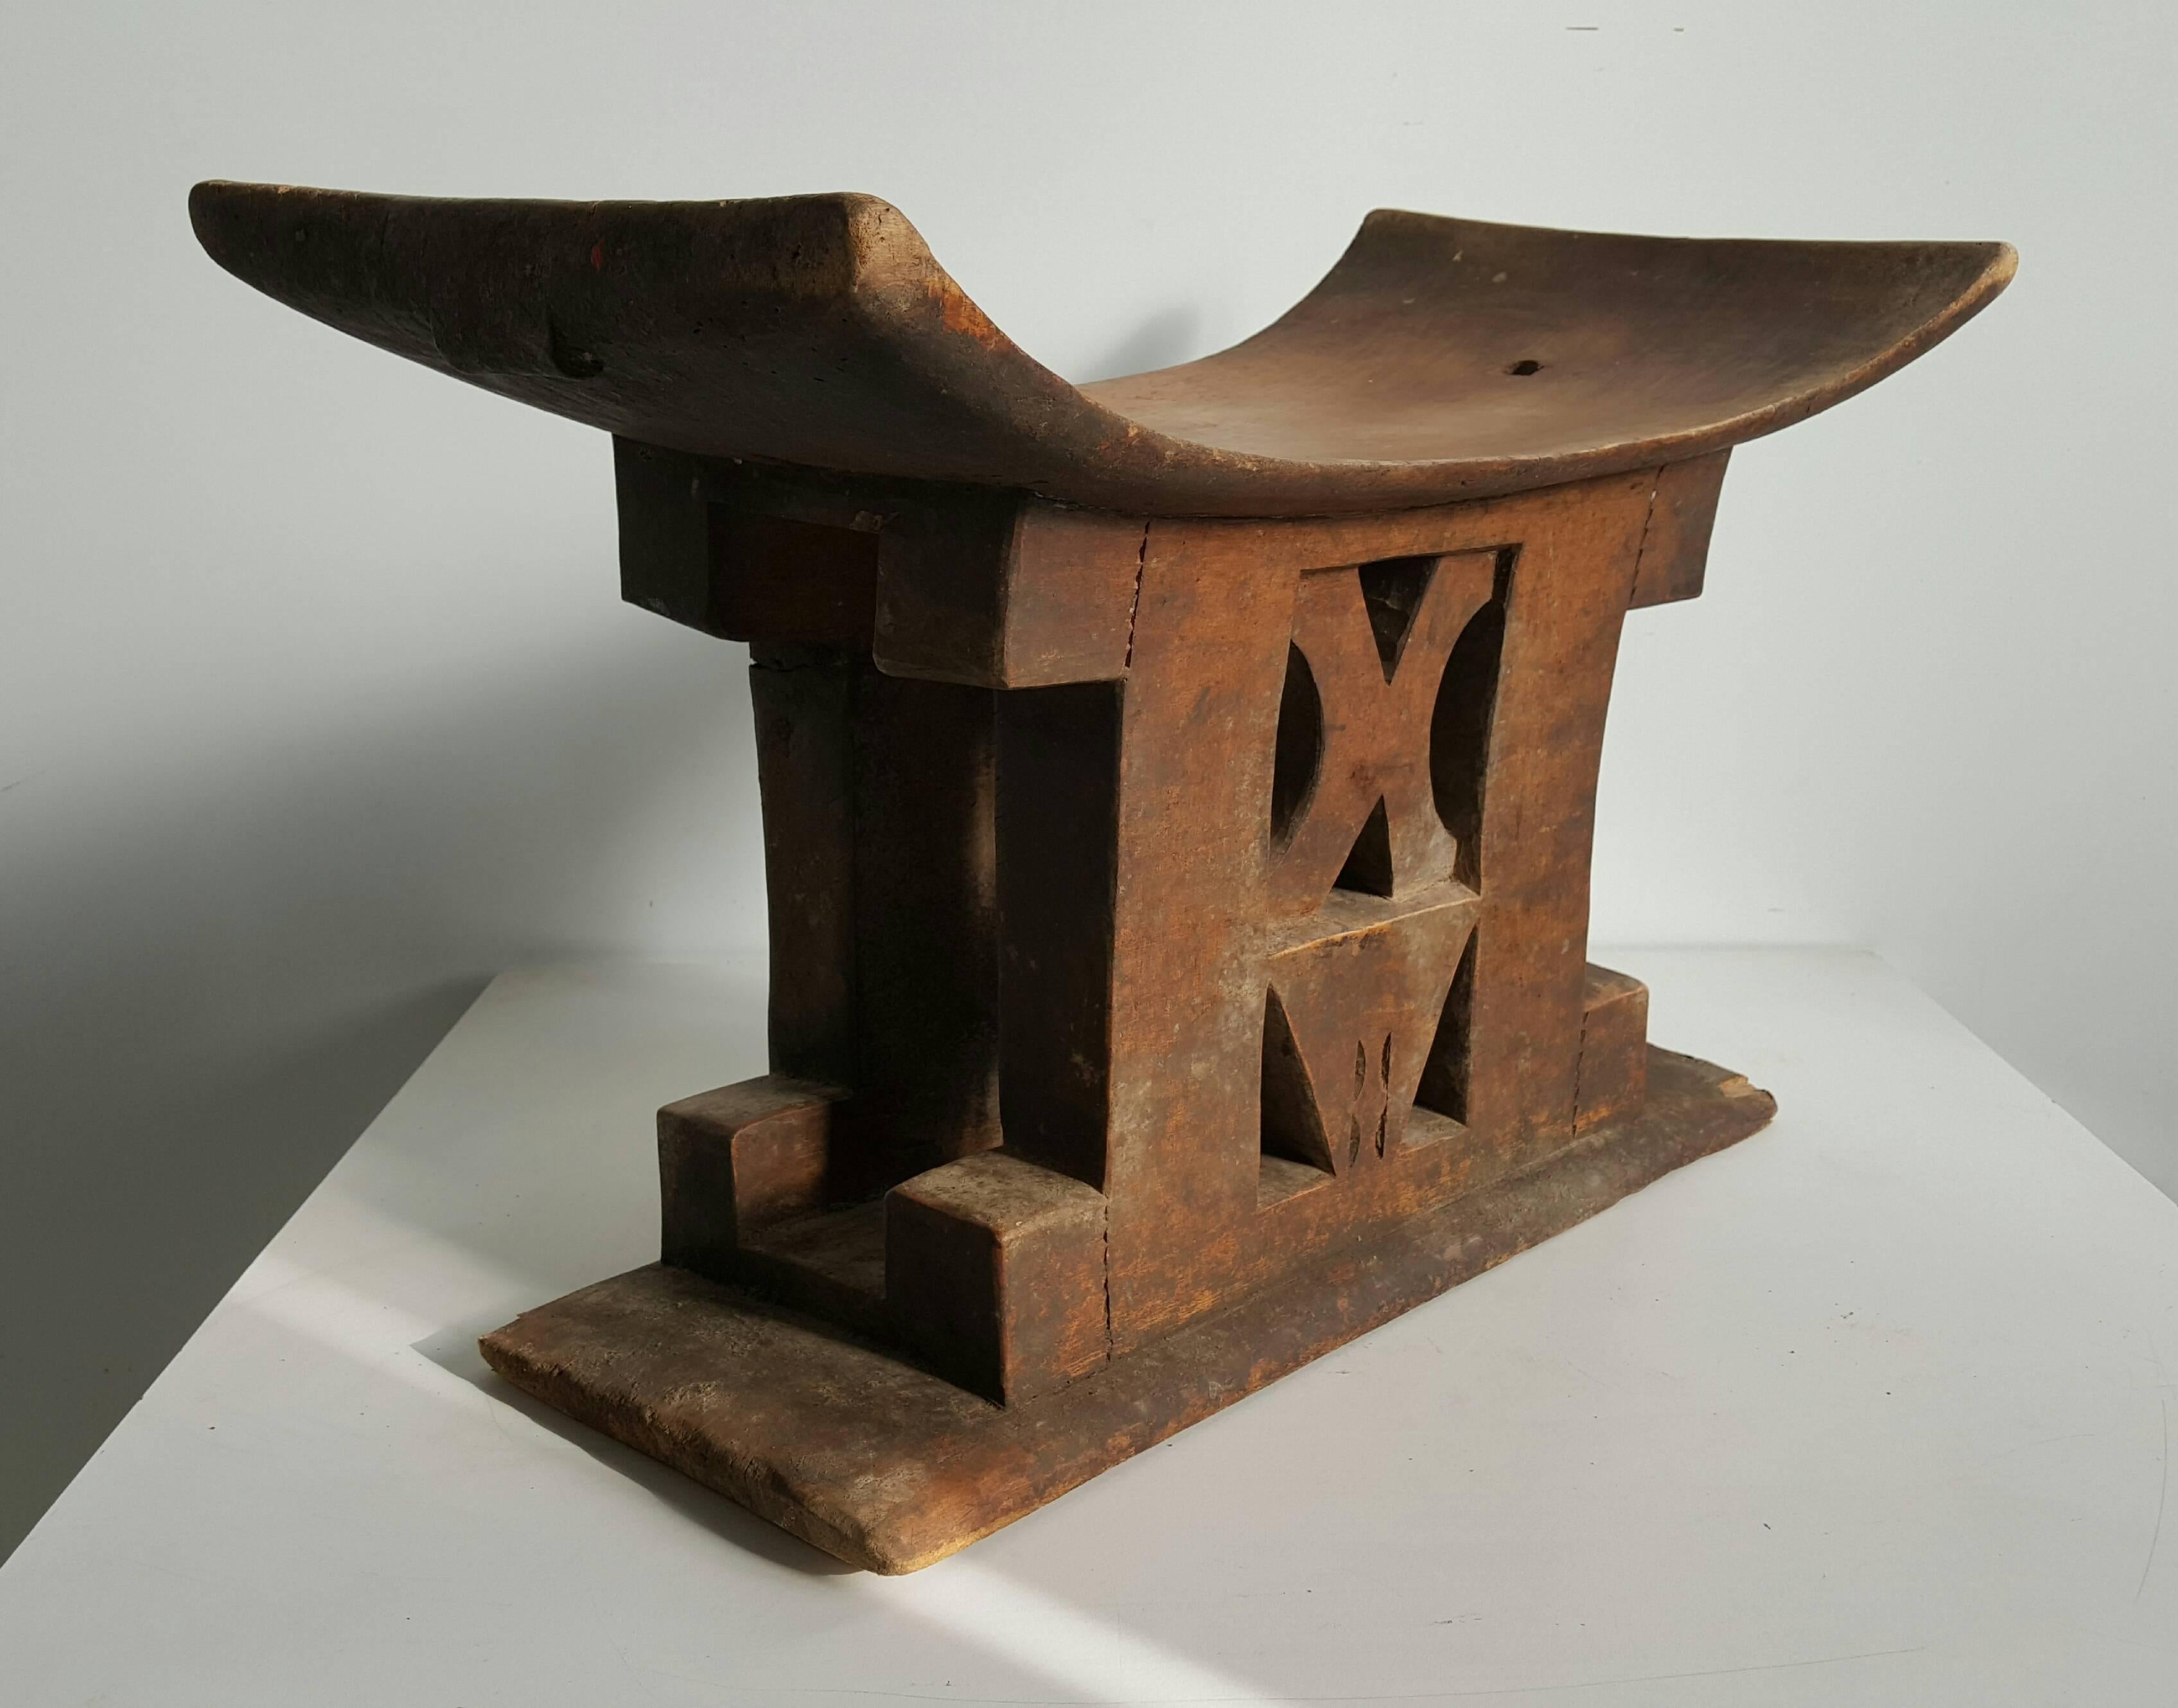 African Ashanti wood stool, Ghana, circa 1920s. Great design Art Deco. The Golden Stool (Ashanti-Twi: Sika 'dwa) is the royal and divine throne of the Ashanti people. According to legend, Okomfo Anokye, High Priest and one of the two chief founders